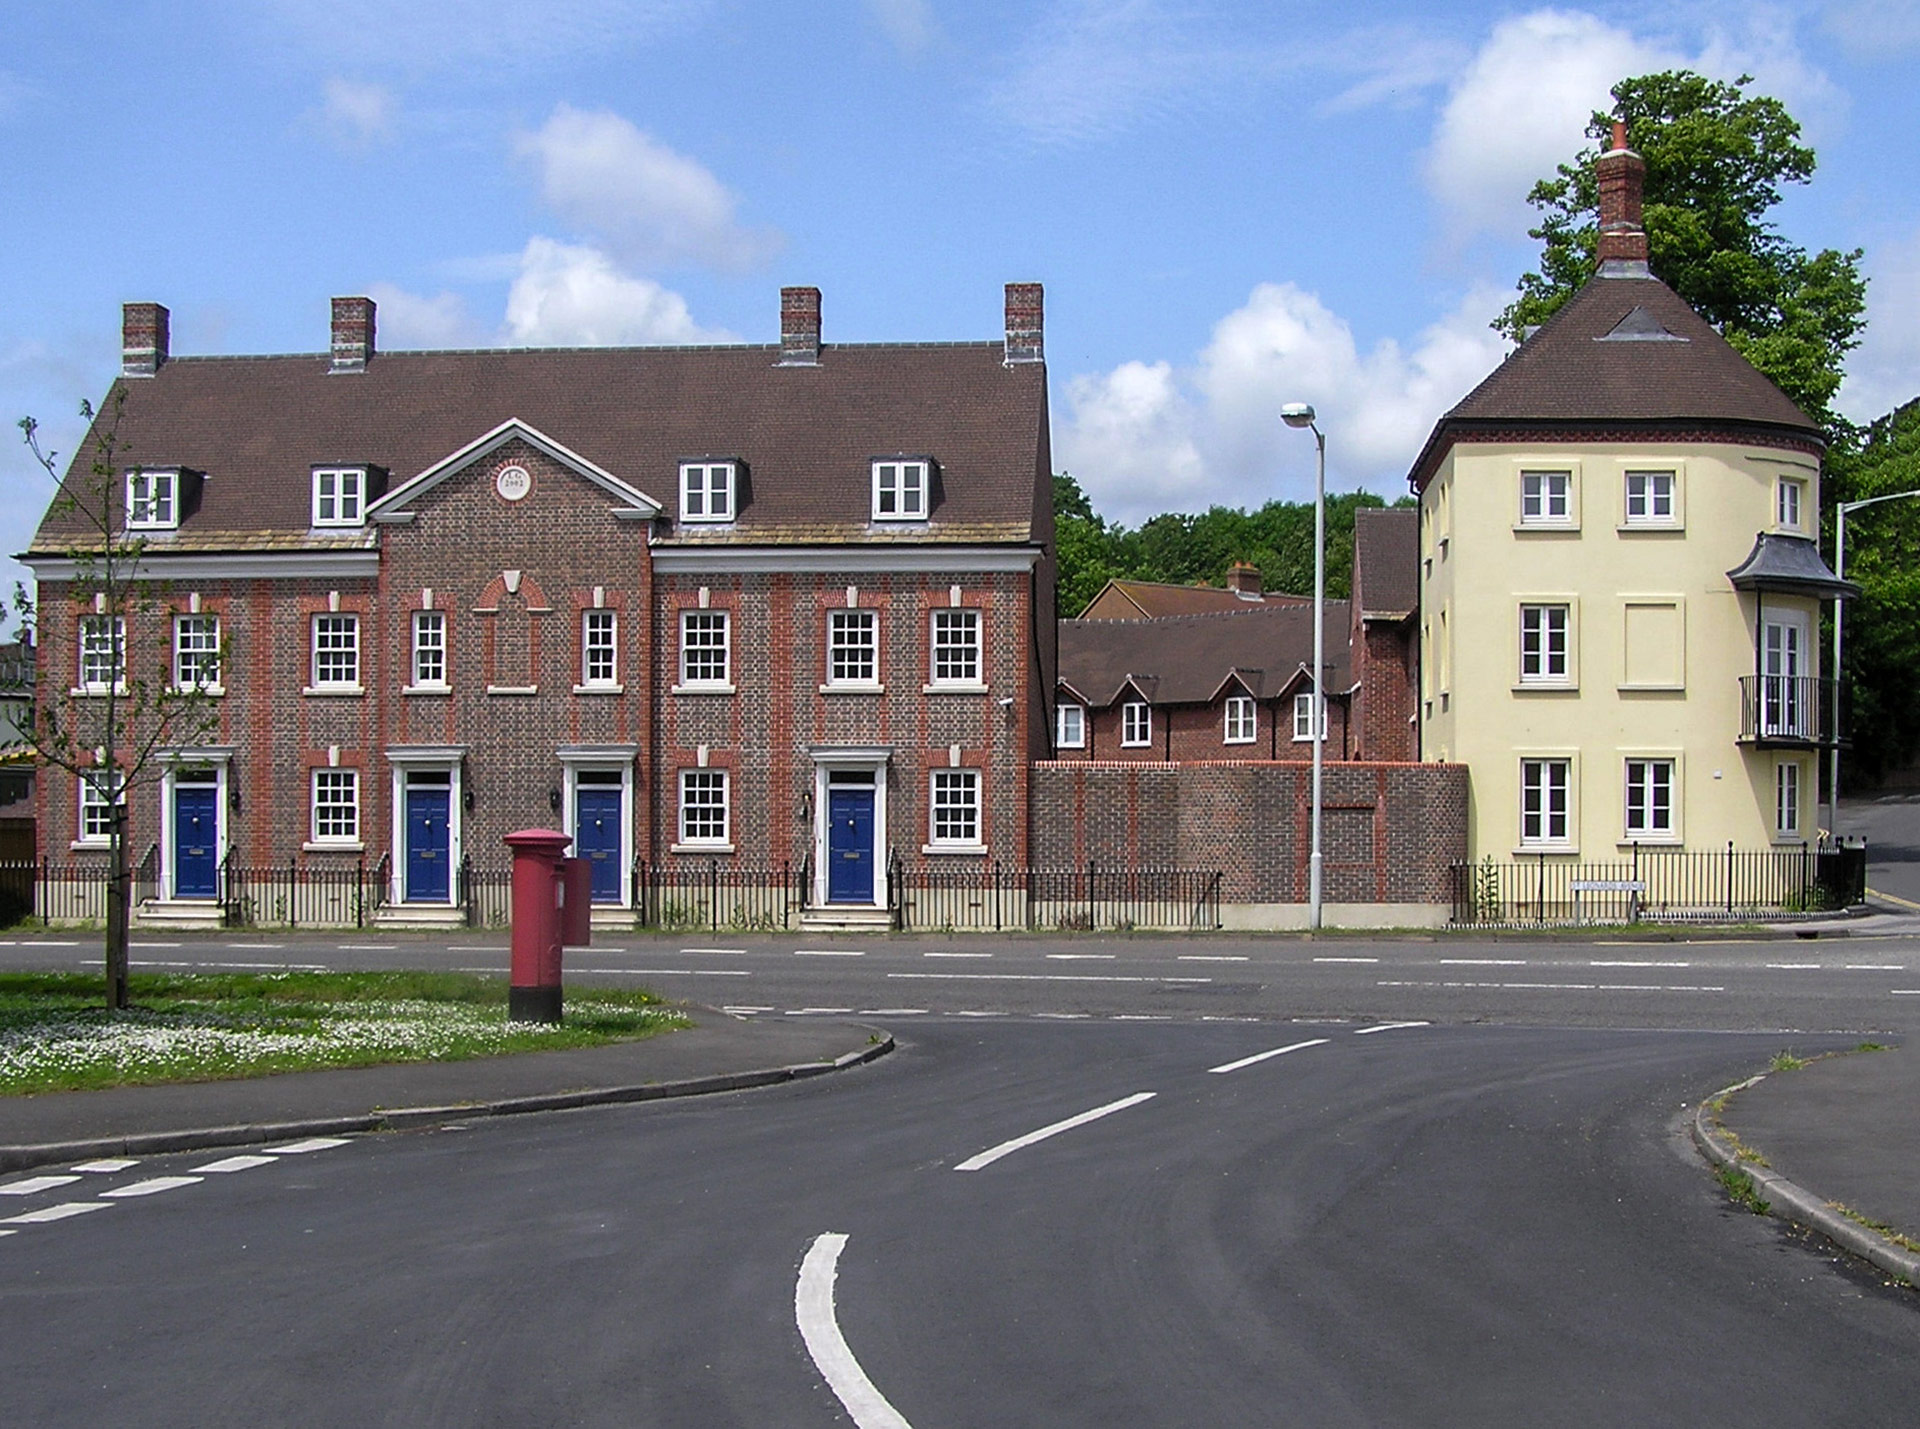 front view of terraced red brick houses and curved wall corner house from across road